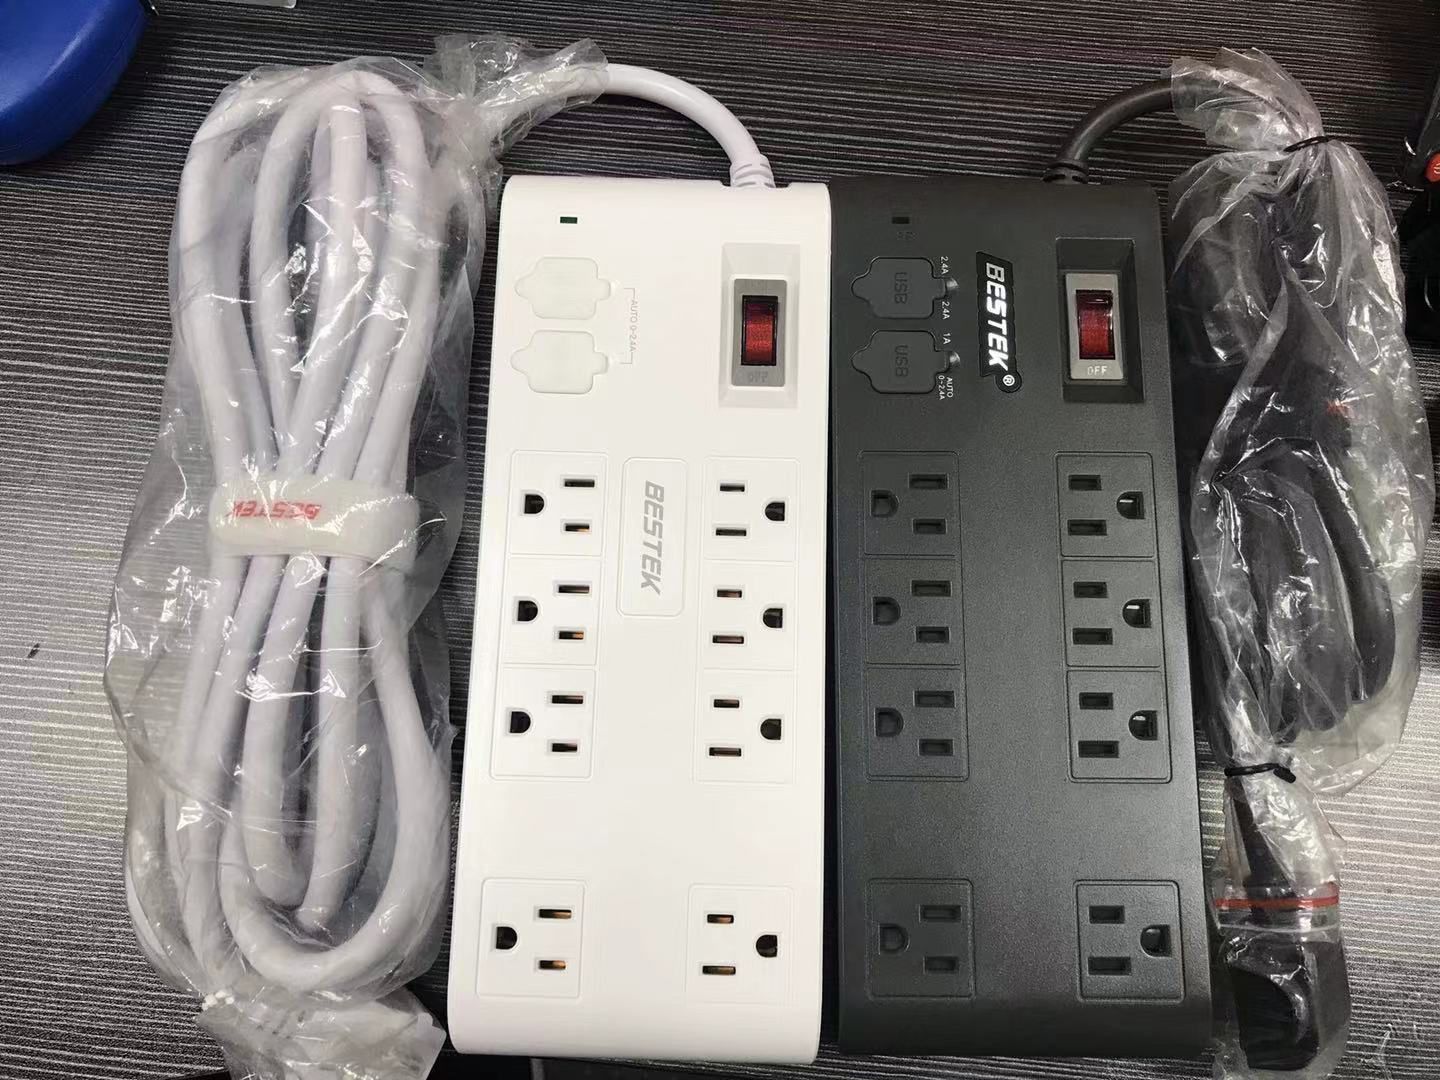 New power charger station